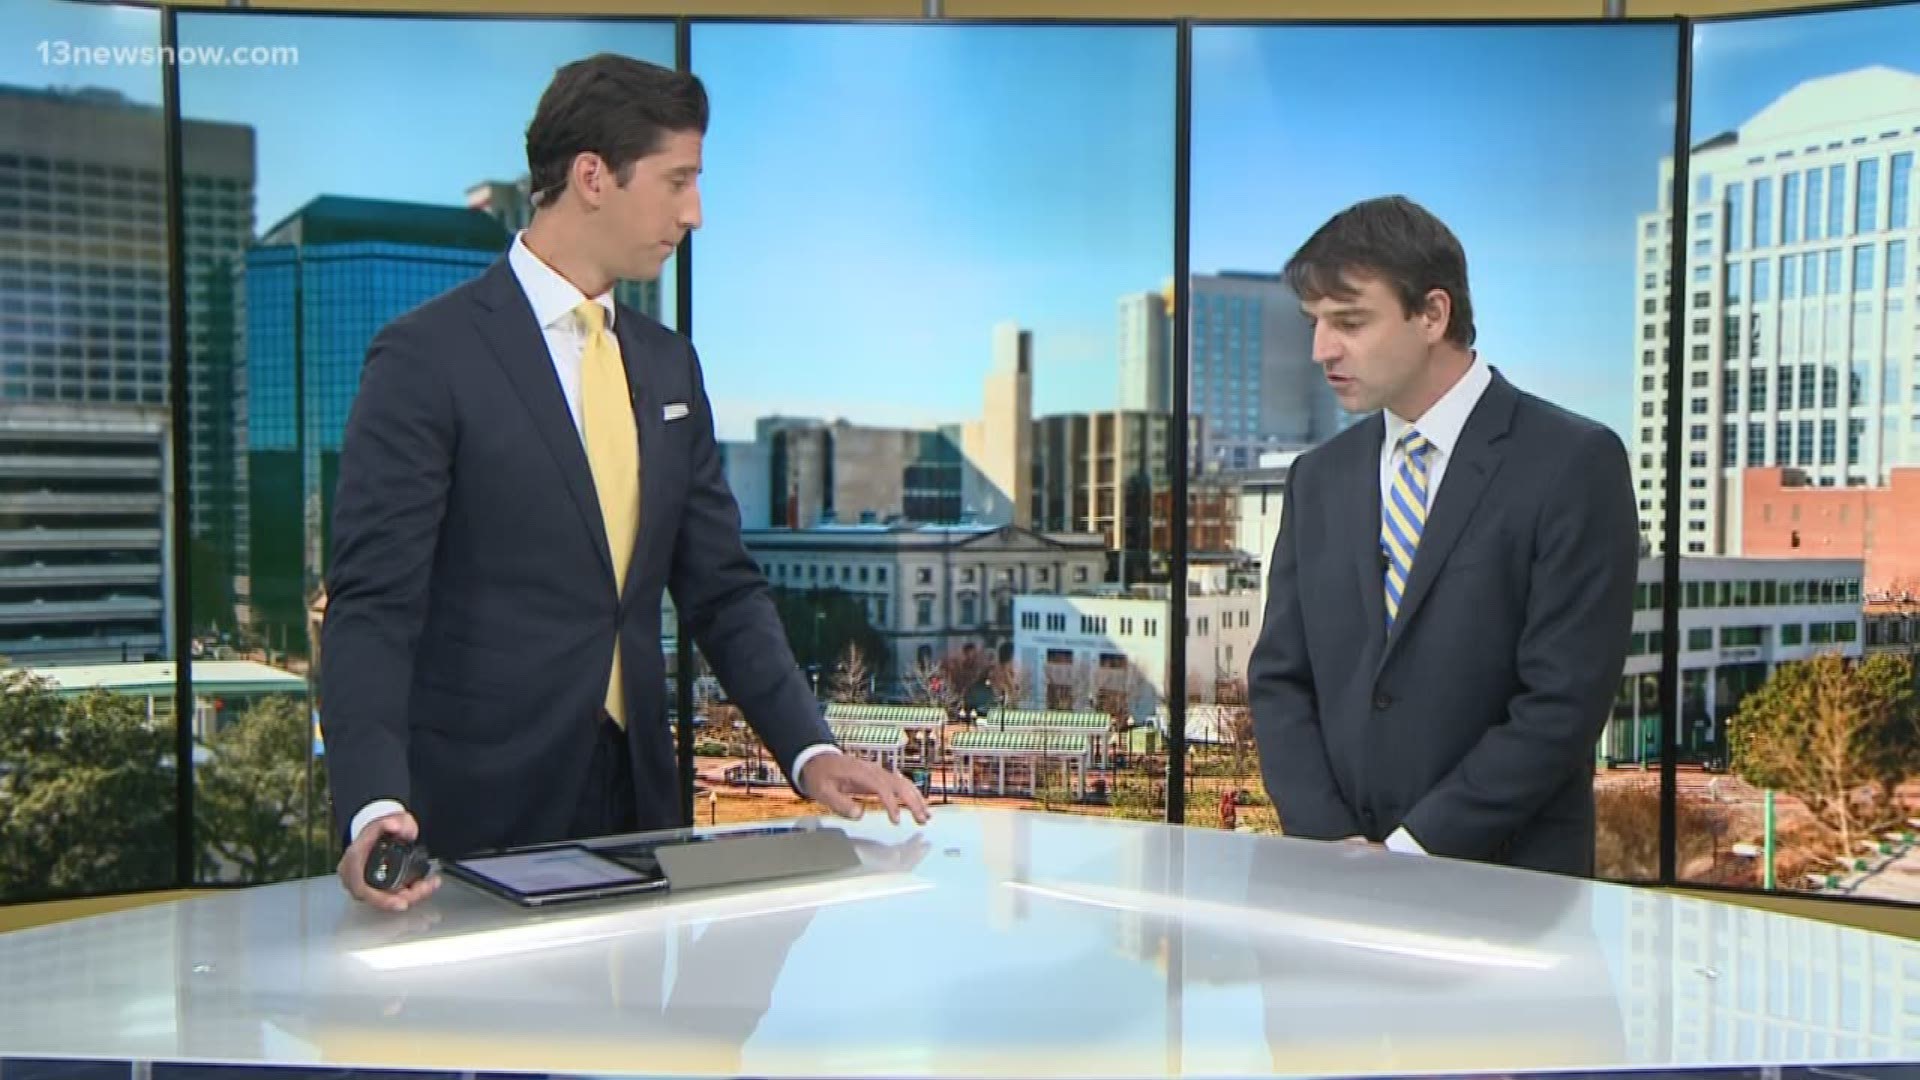 13News Now Philip Townsend sat down with Legal Analyst Ed Booth to break down the changes in Virginia laws that took effect on July 1, 2019.